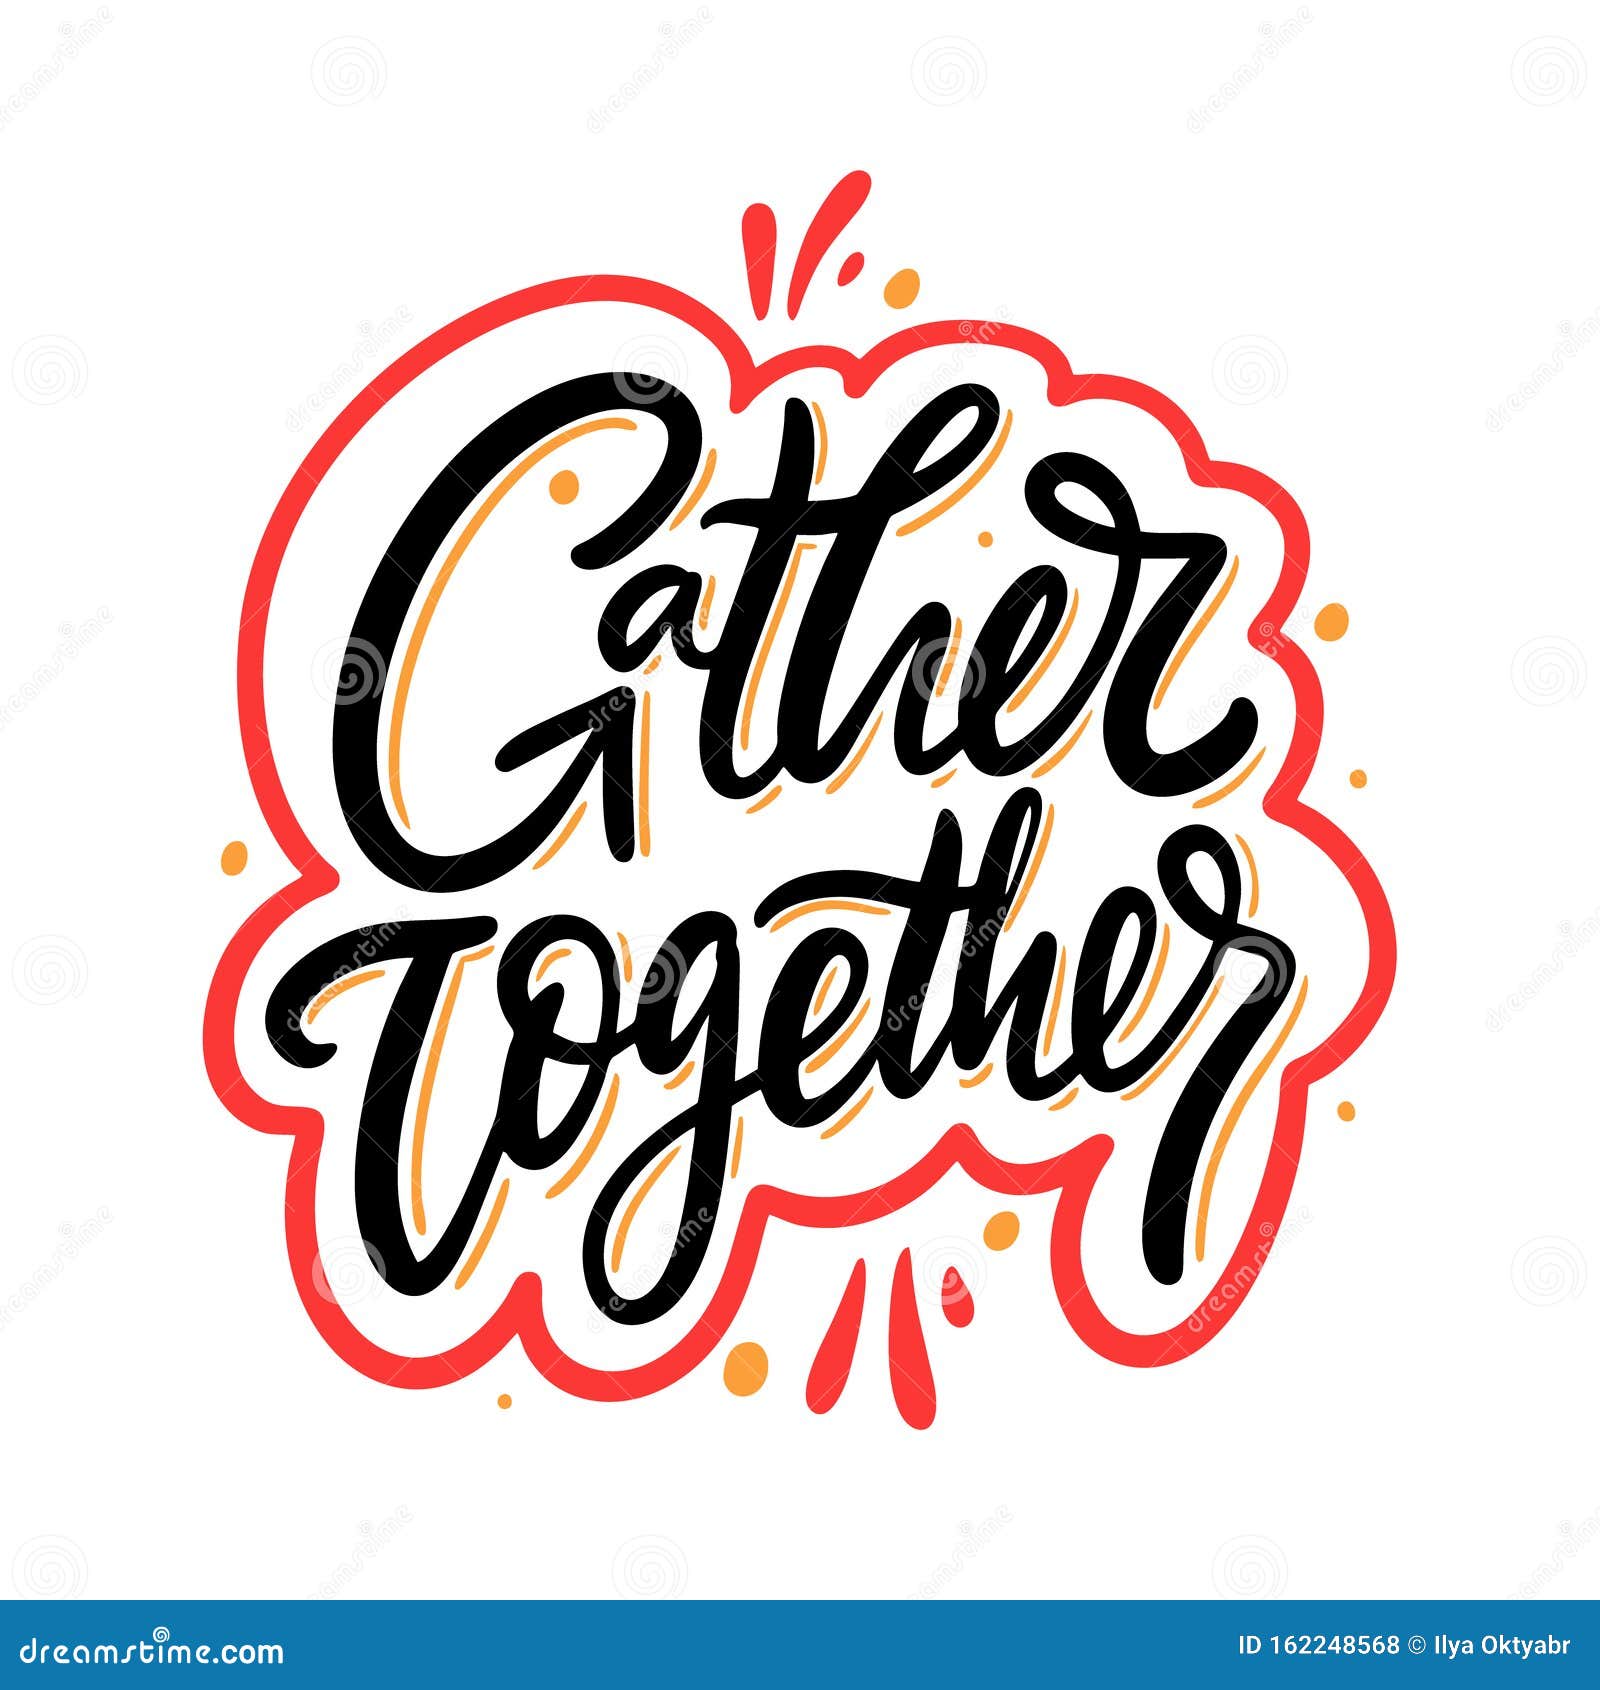 Gather Together Hand Drawn Vector Lettering. Isolated on White Background  Stock Illustration - Illustration of handwritten, hearts: 162248568